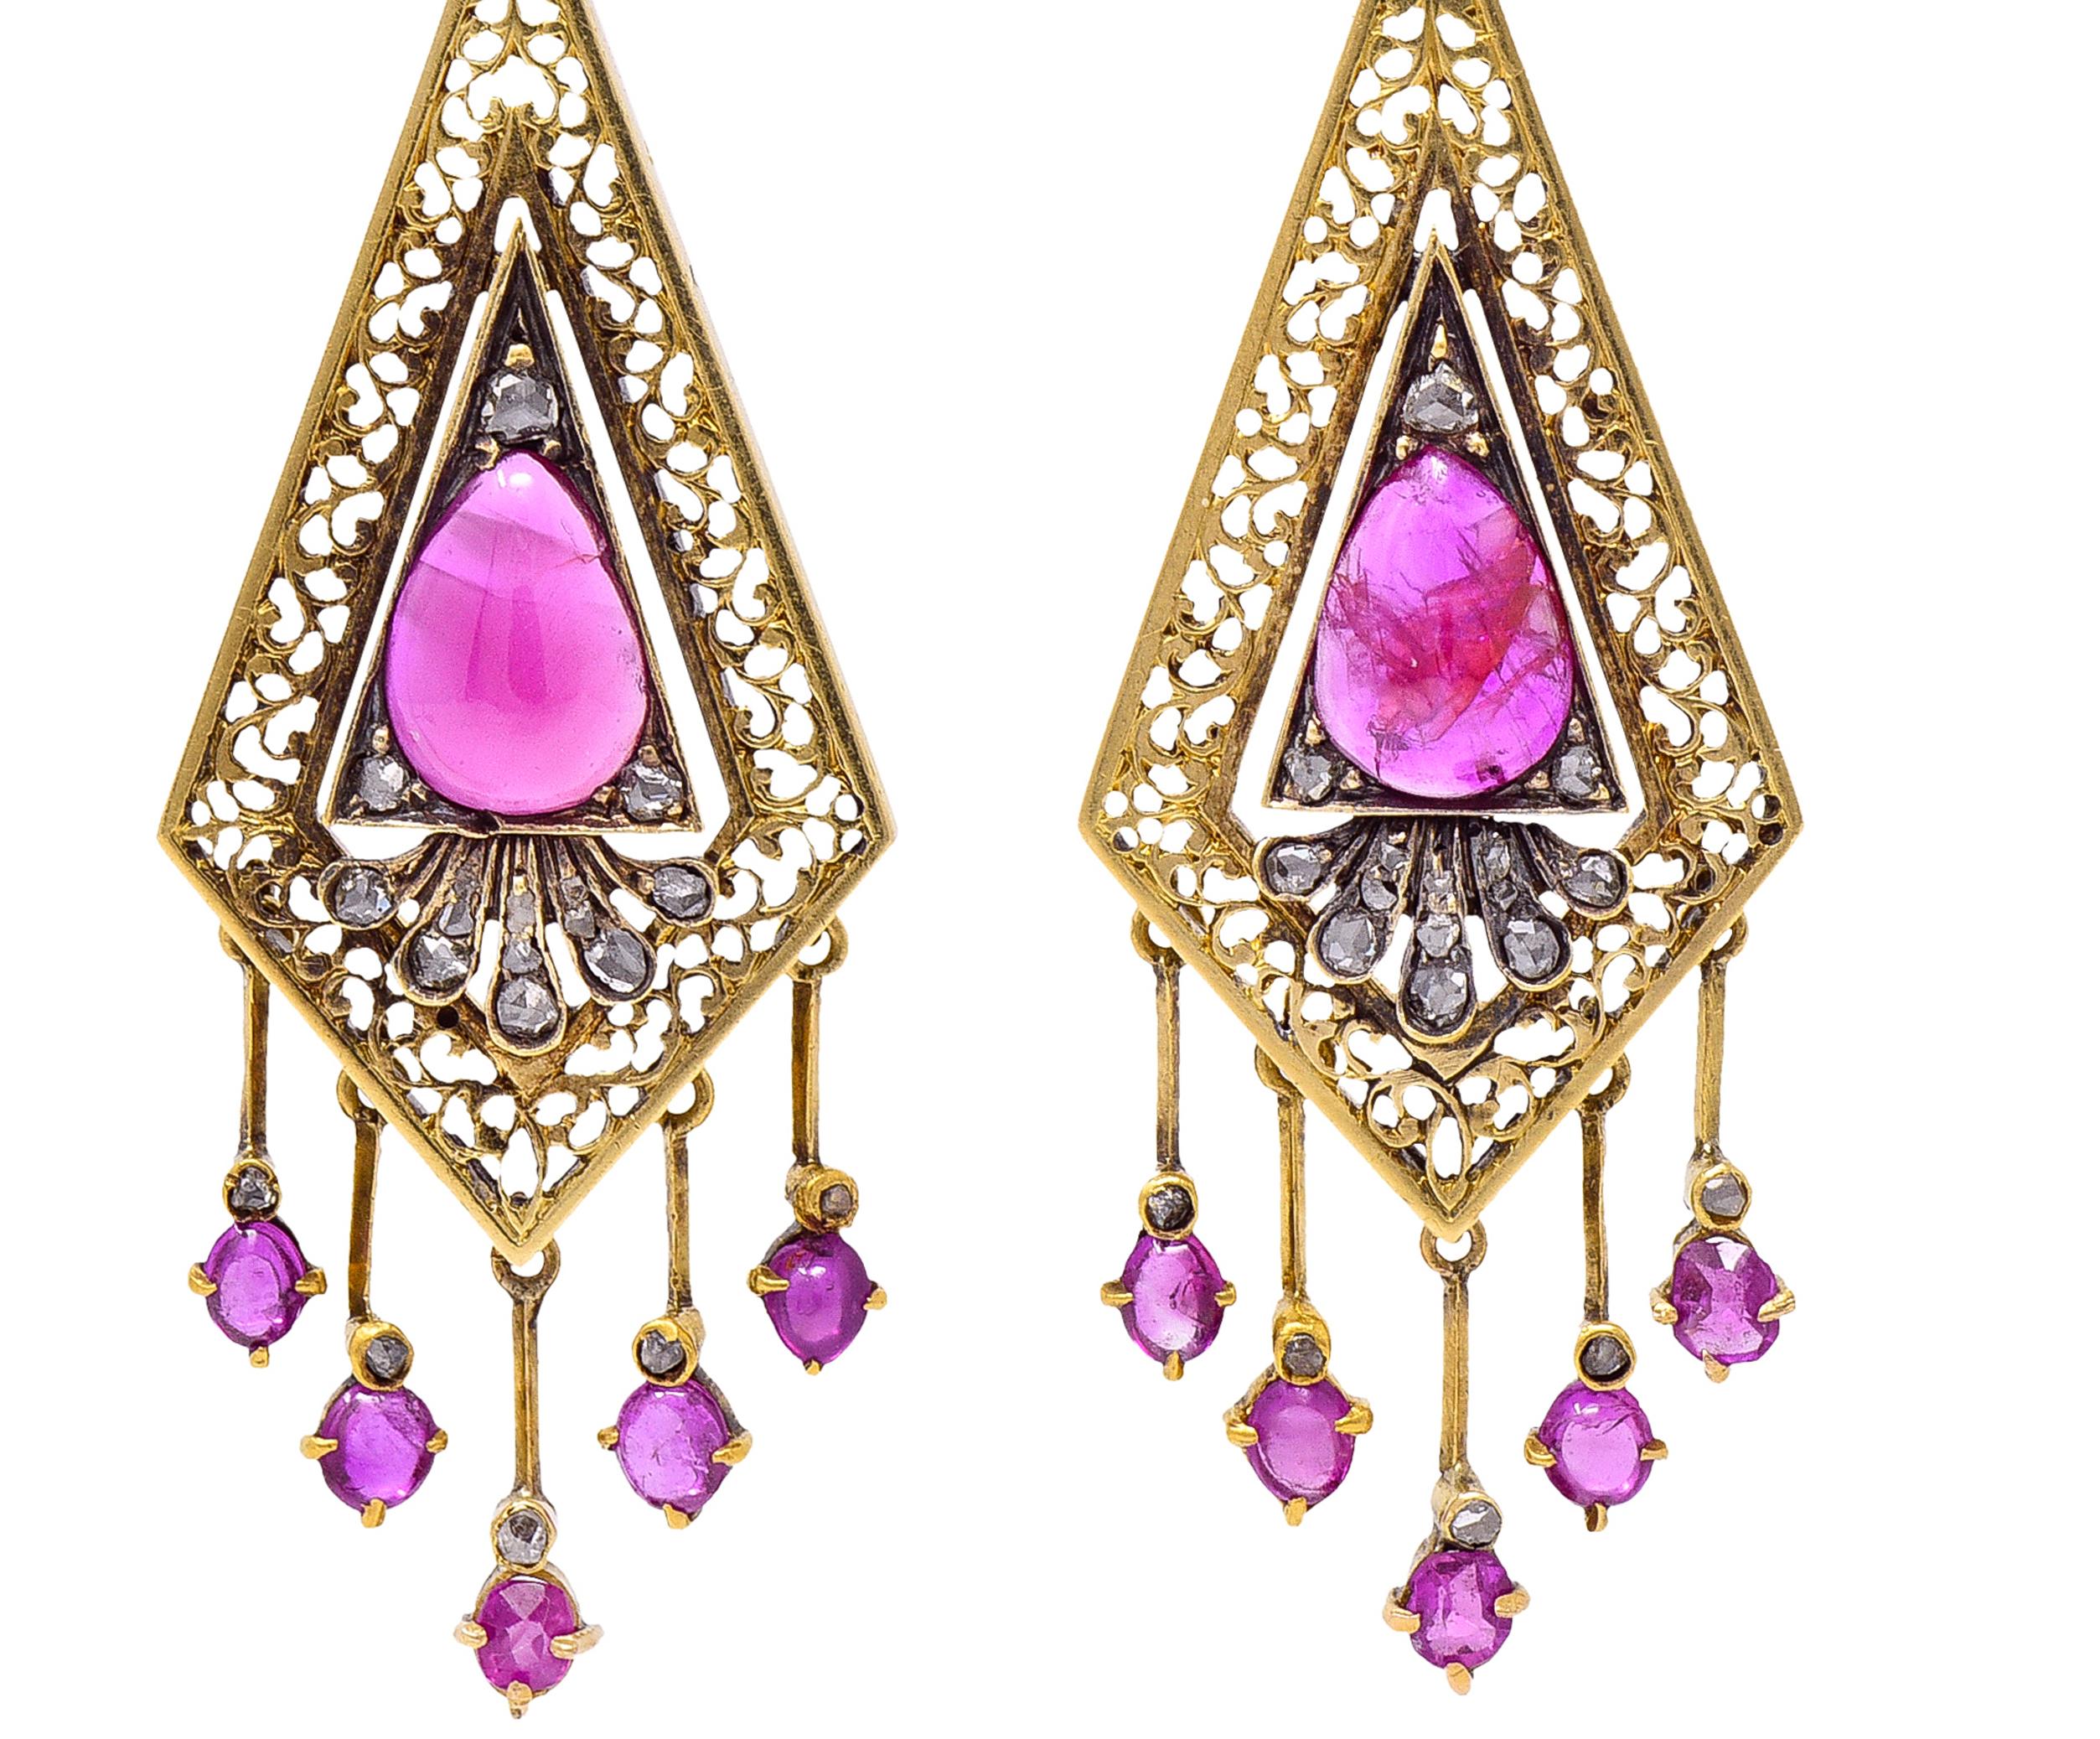 Comprised of bow motif surmounts suspending kite shaped drops with an articulating fringe. Featuring pear shaped ruby cabochons bead set in triangular frame surround. Centered on pierced scroll motif kite drop - semi-transparent purplish pink in